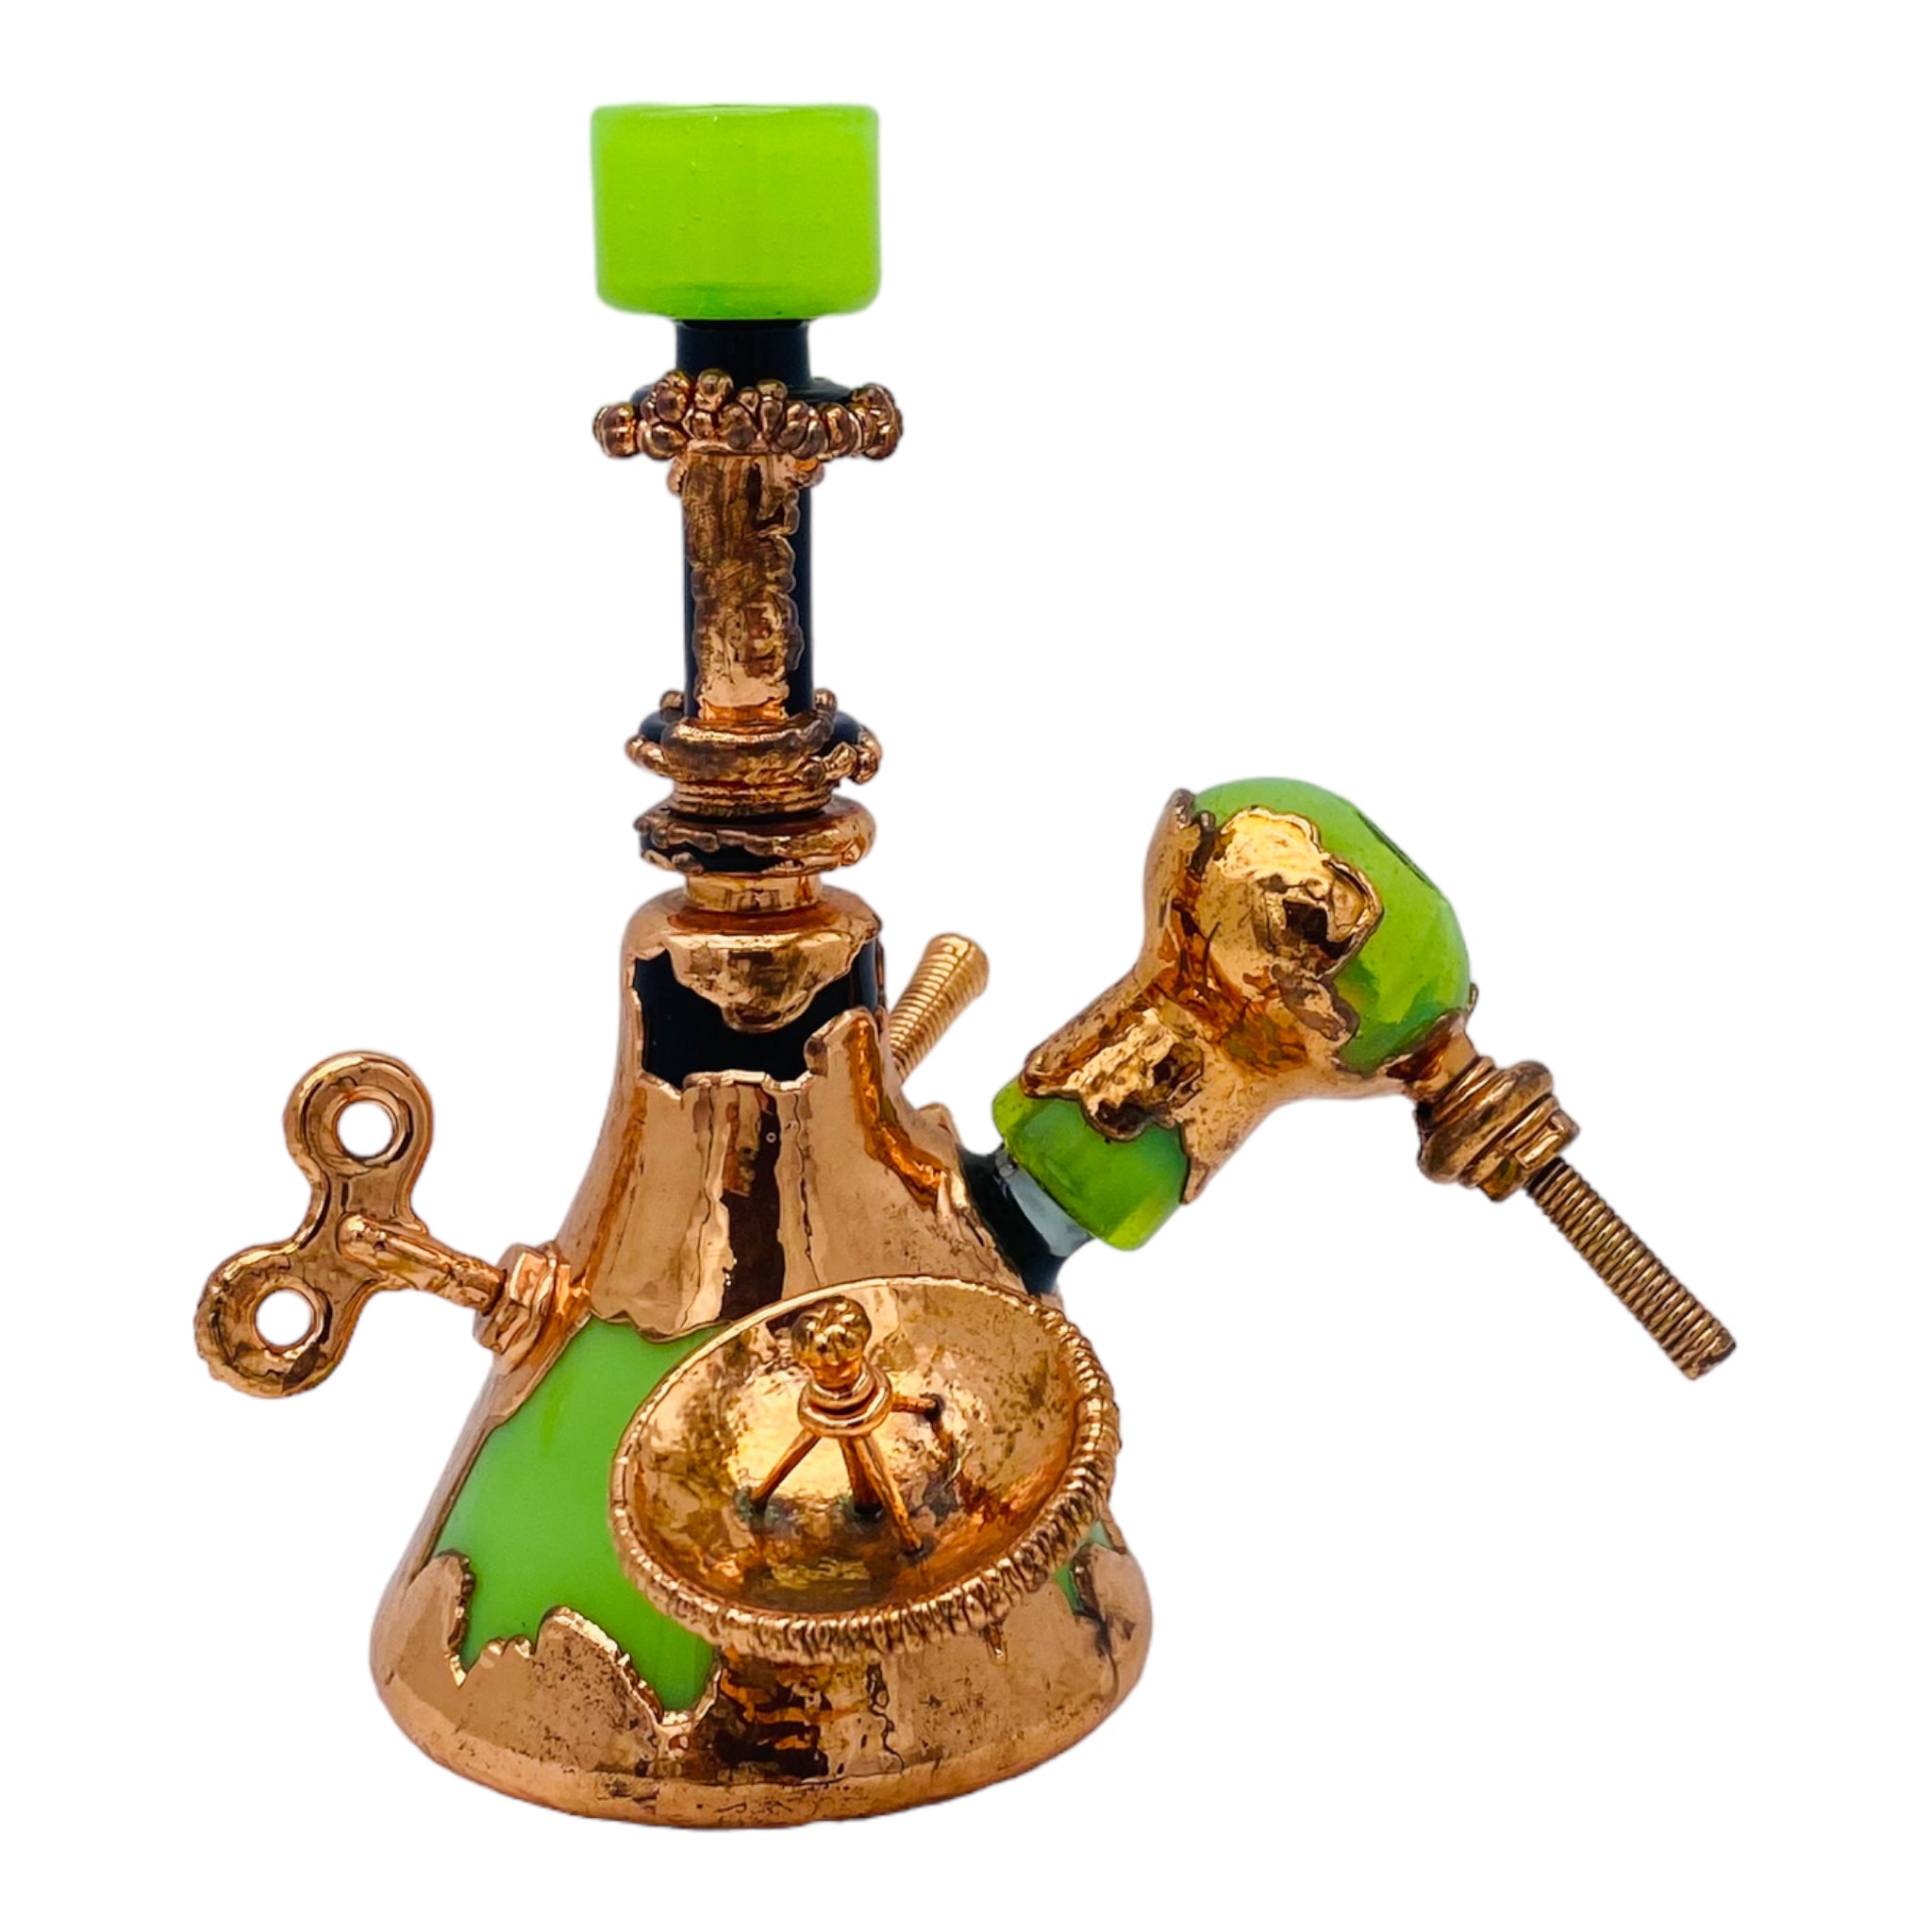 SNIC Glass - Copper Electroformed Glass Dab Rig With Steampunk Theme